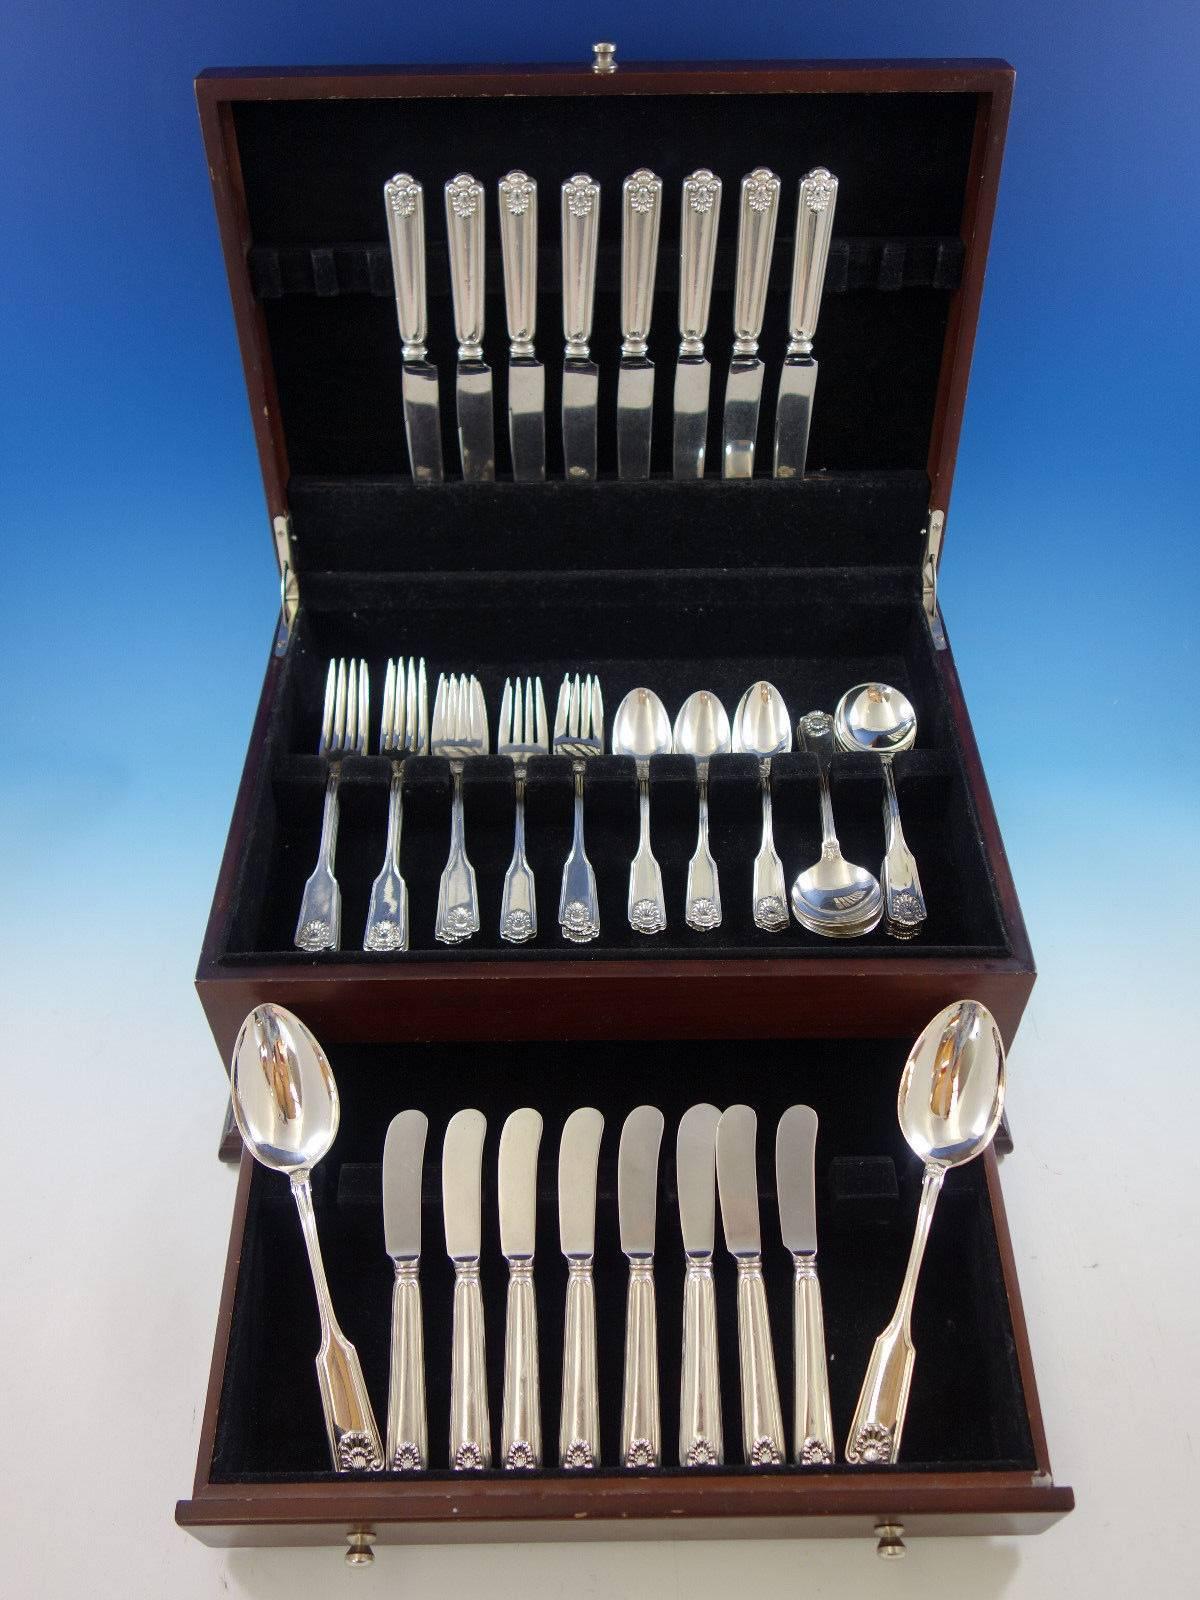 Fiddle shell by Frank Smith sterling silver flatware set - 50 pieces. This set includes: eight knives, 8 3/4